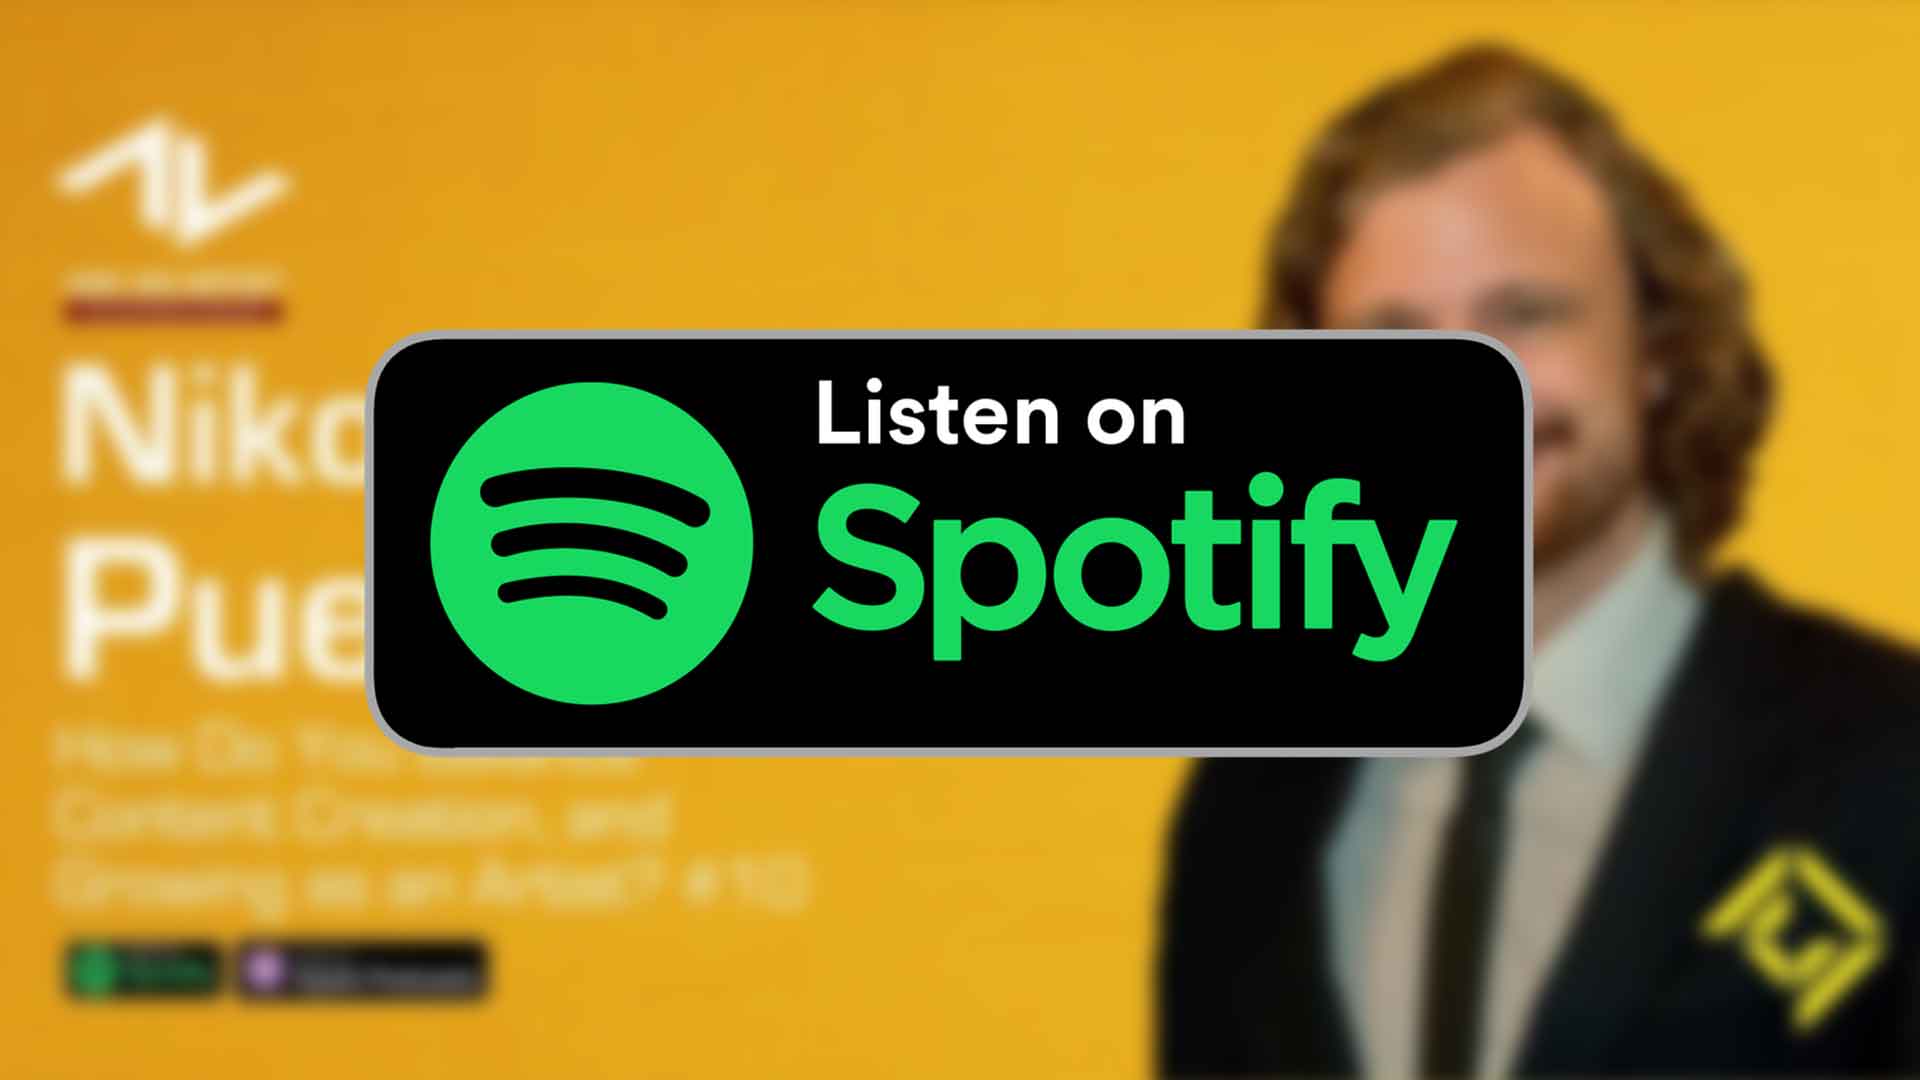 Listen to episode 10 of Ask An Artist on Spotify.